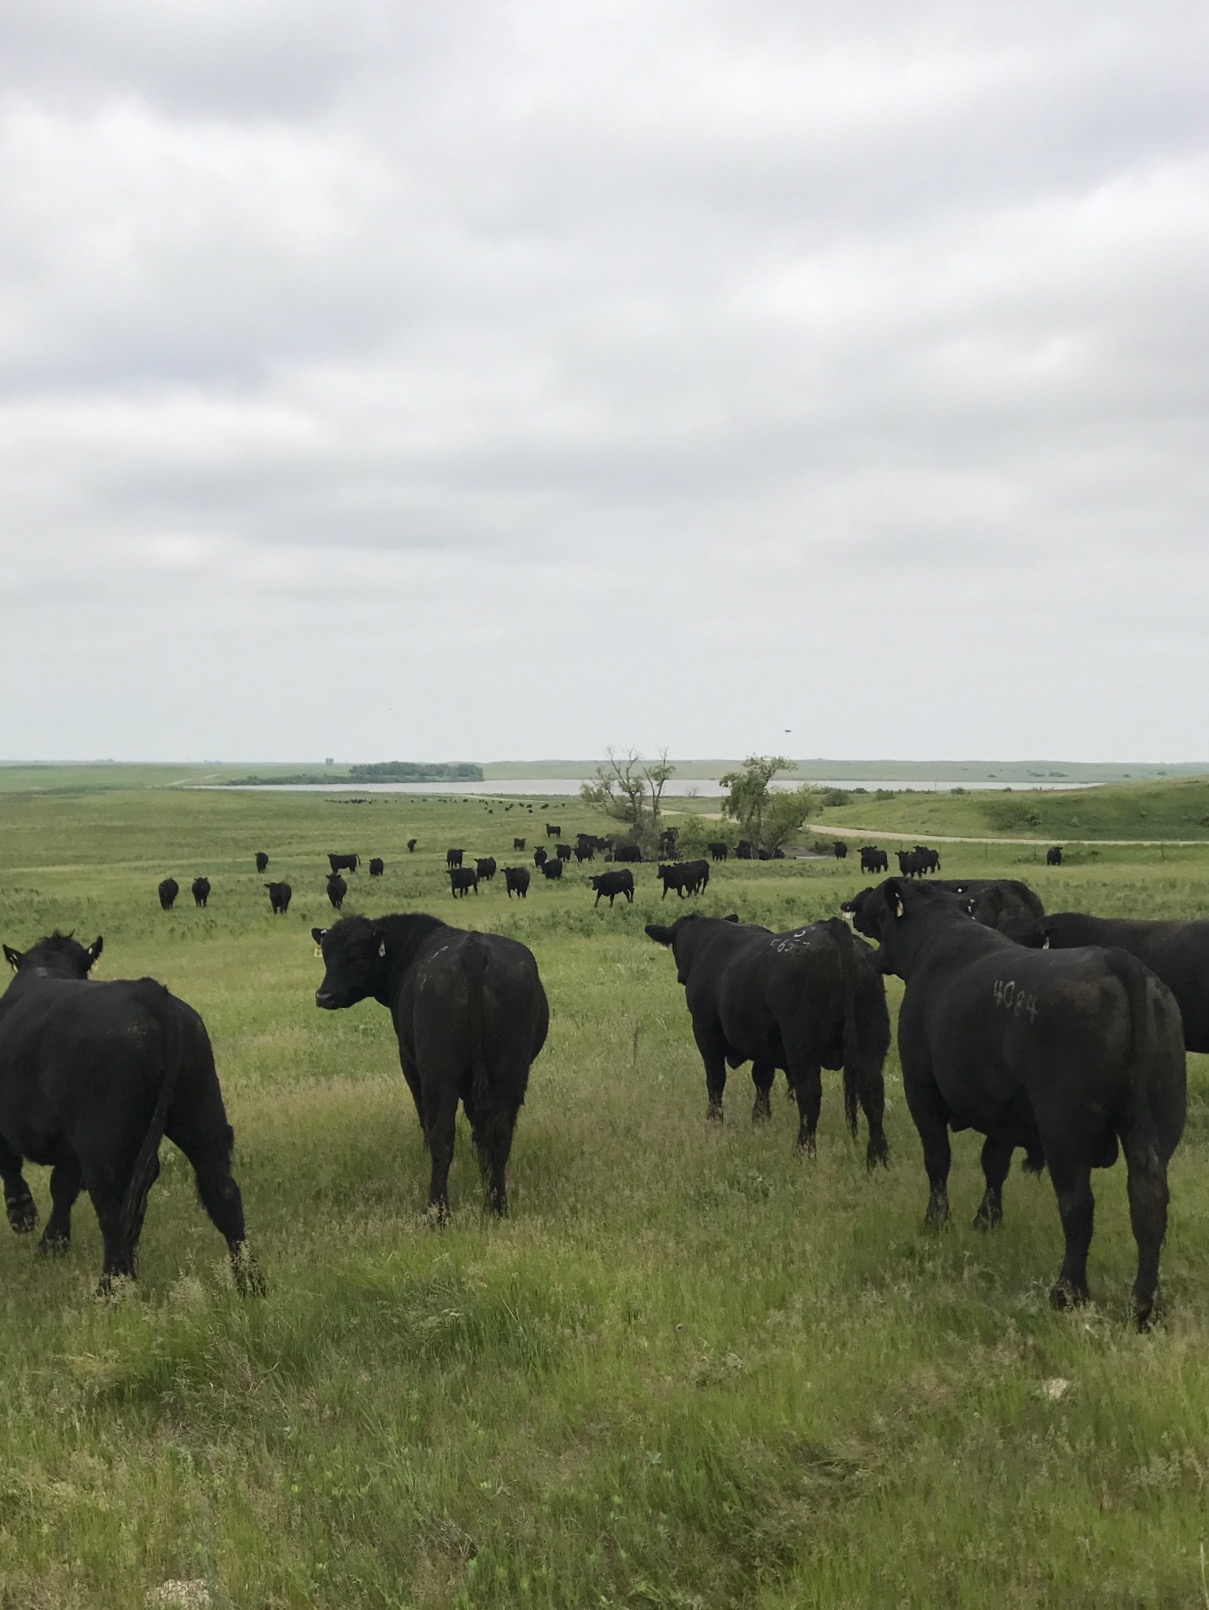 Morning Ag News, November 3, 2021: U.S. beef and pork exports to Central America up from 2020